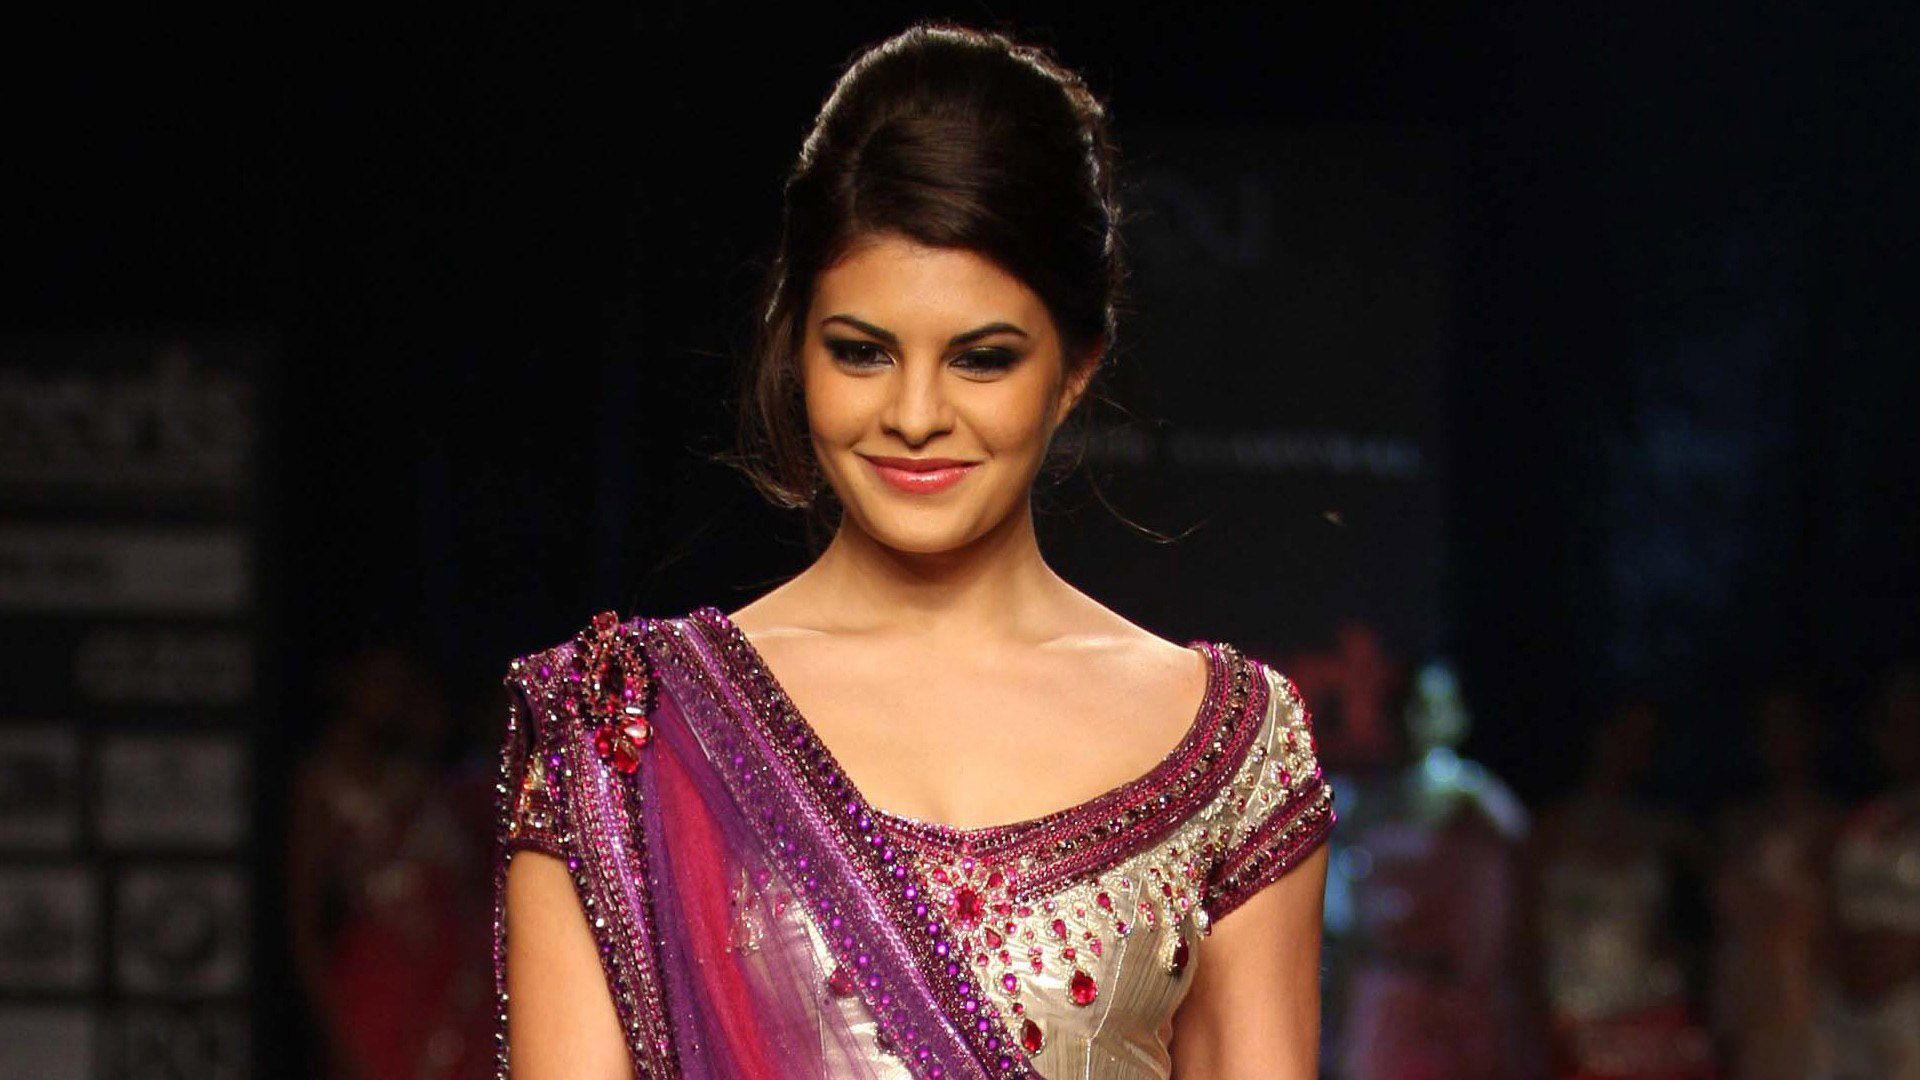 Jacqueline Fernandez In a Fashion Show. HD Bollywood Actresses